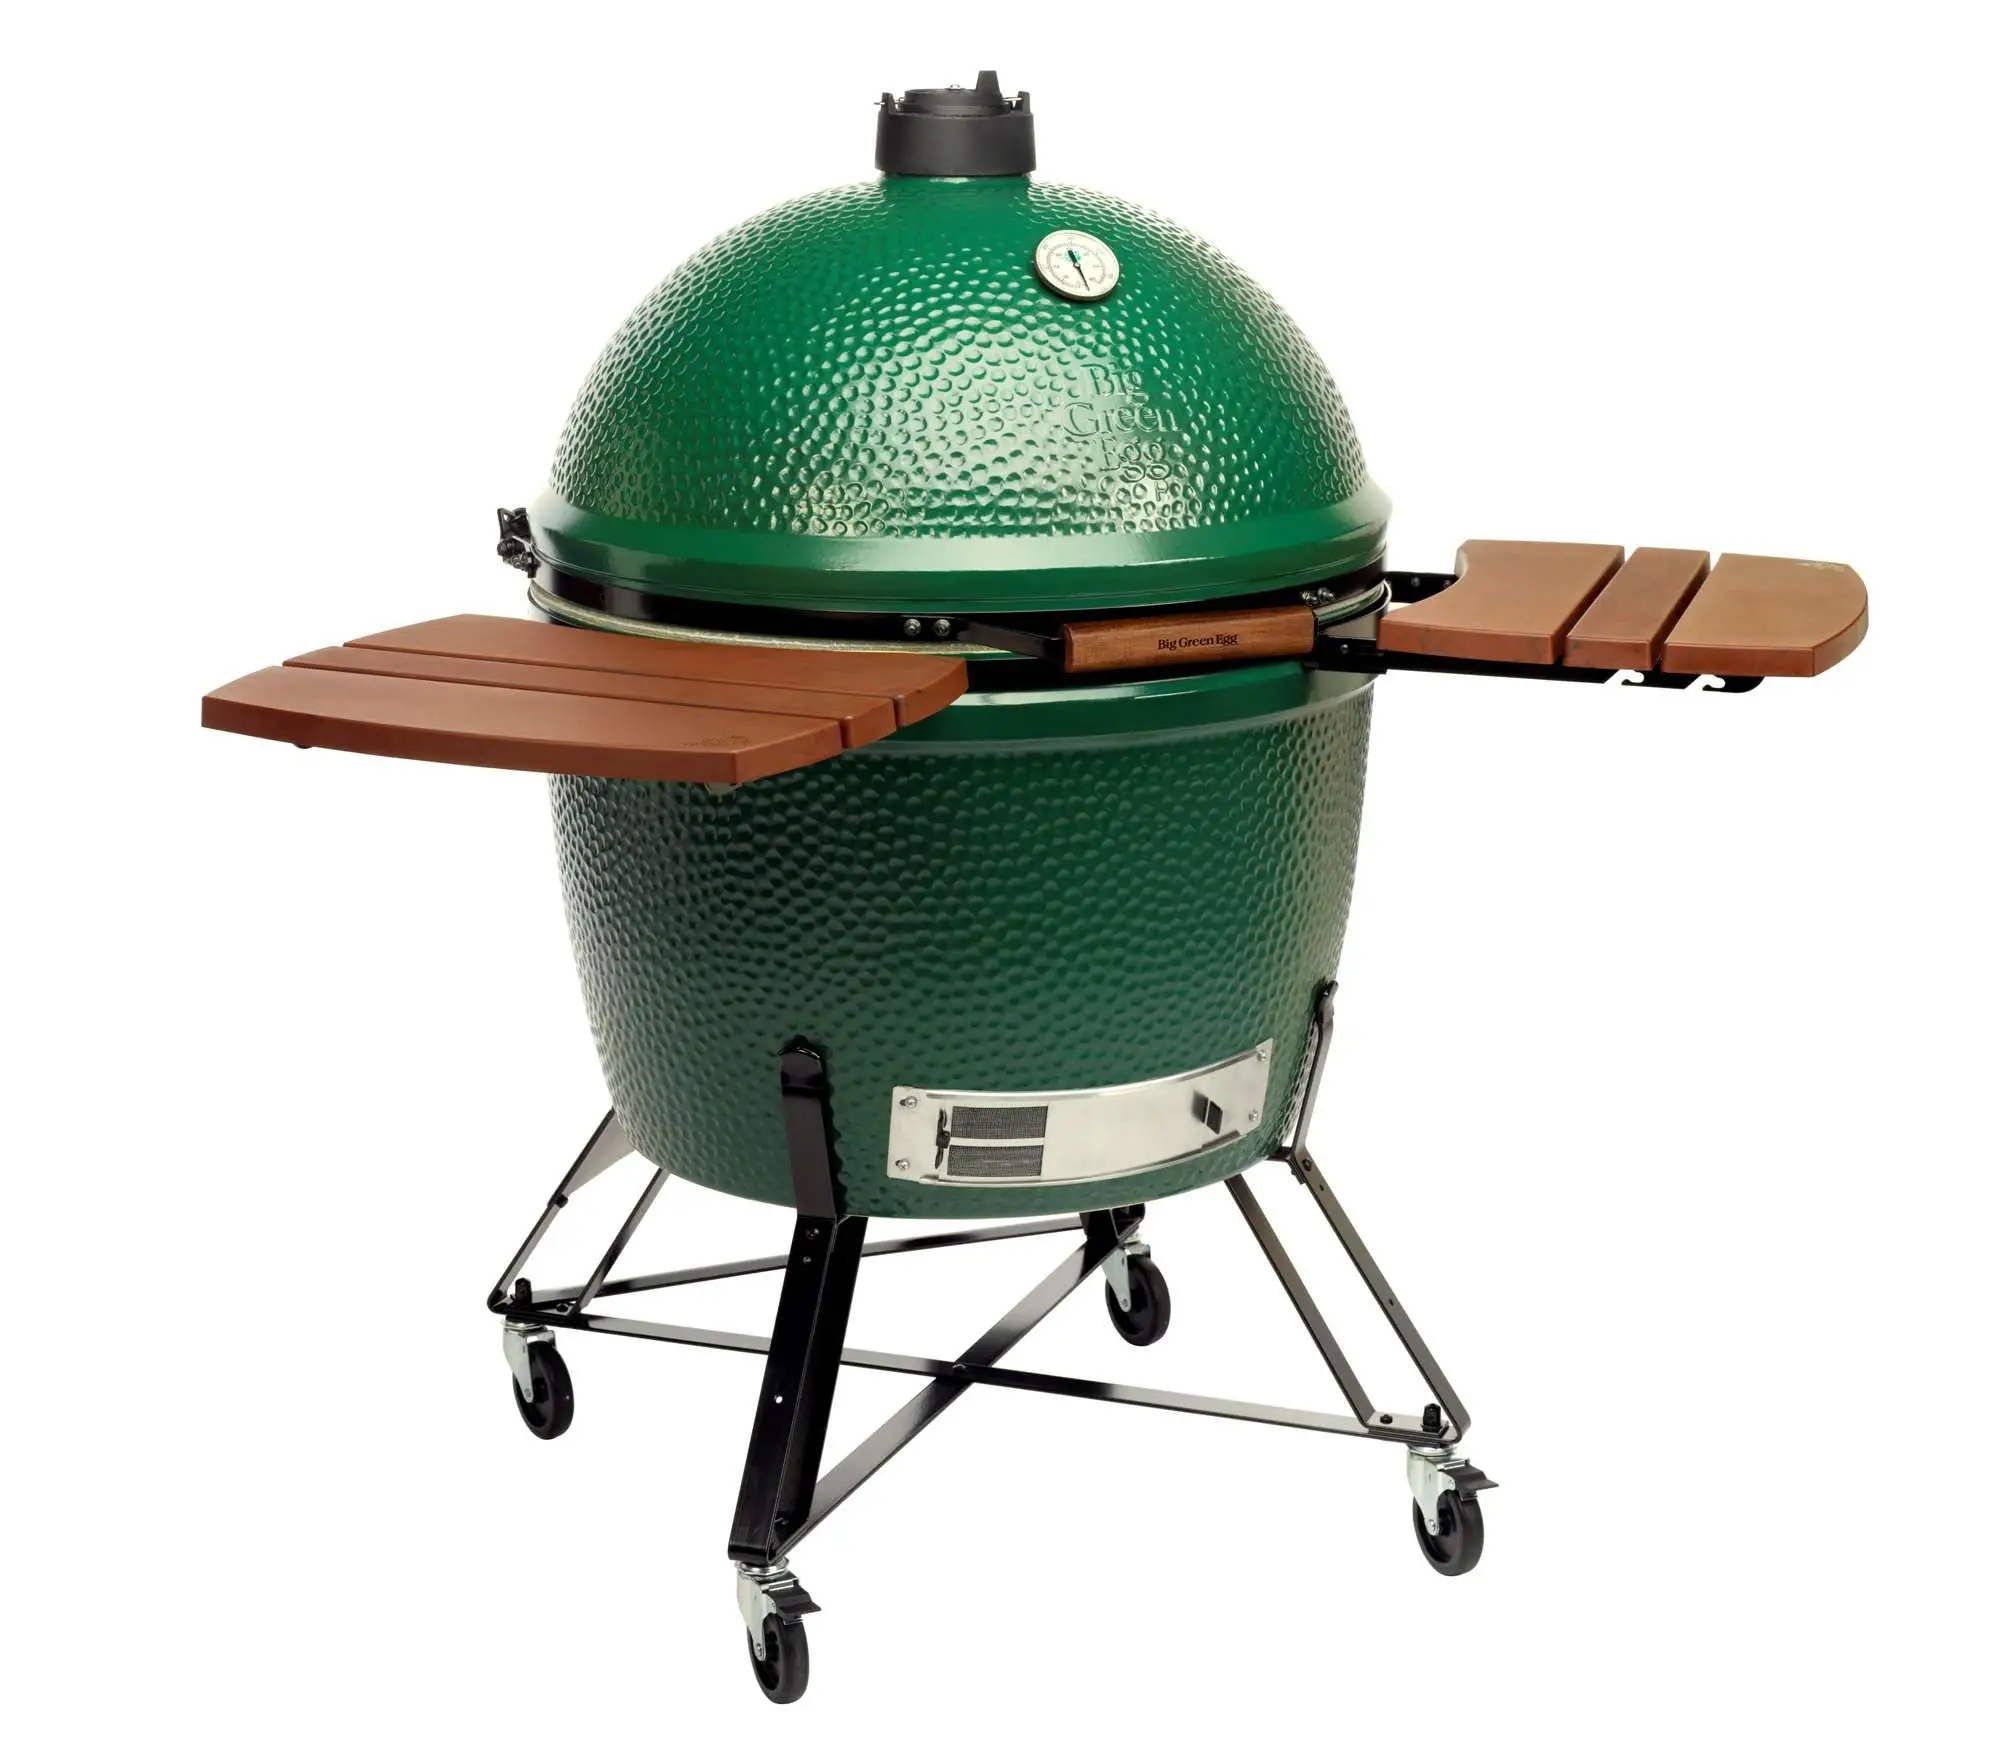 Big Green Egg Prices for 2018 * New Updates*